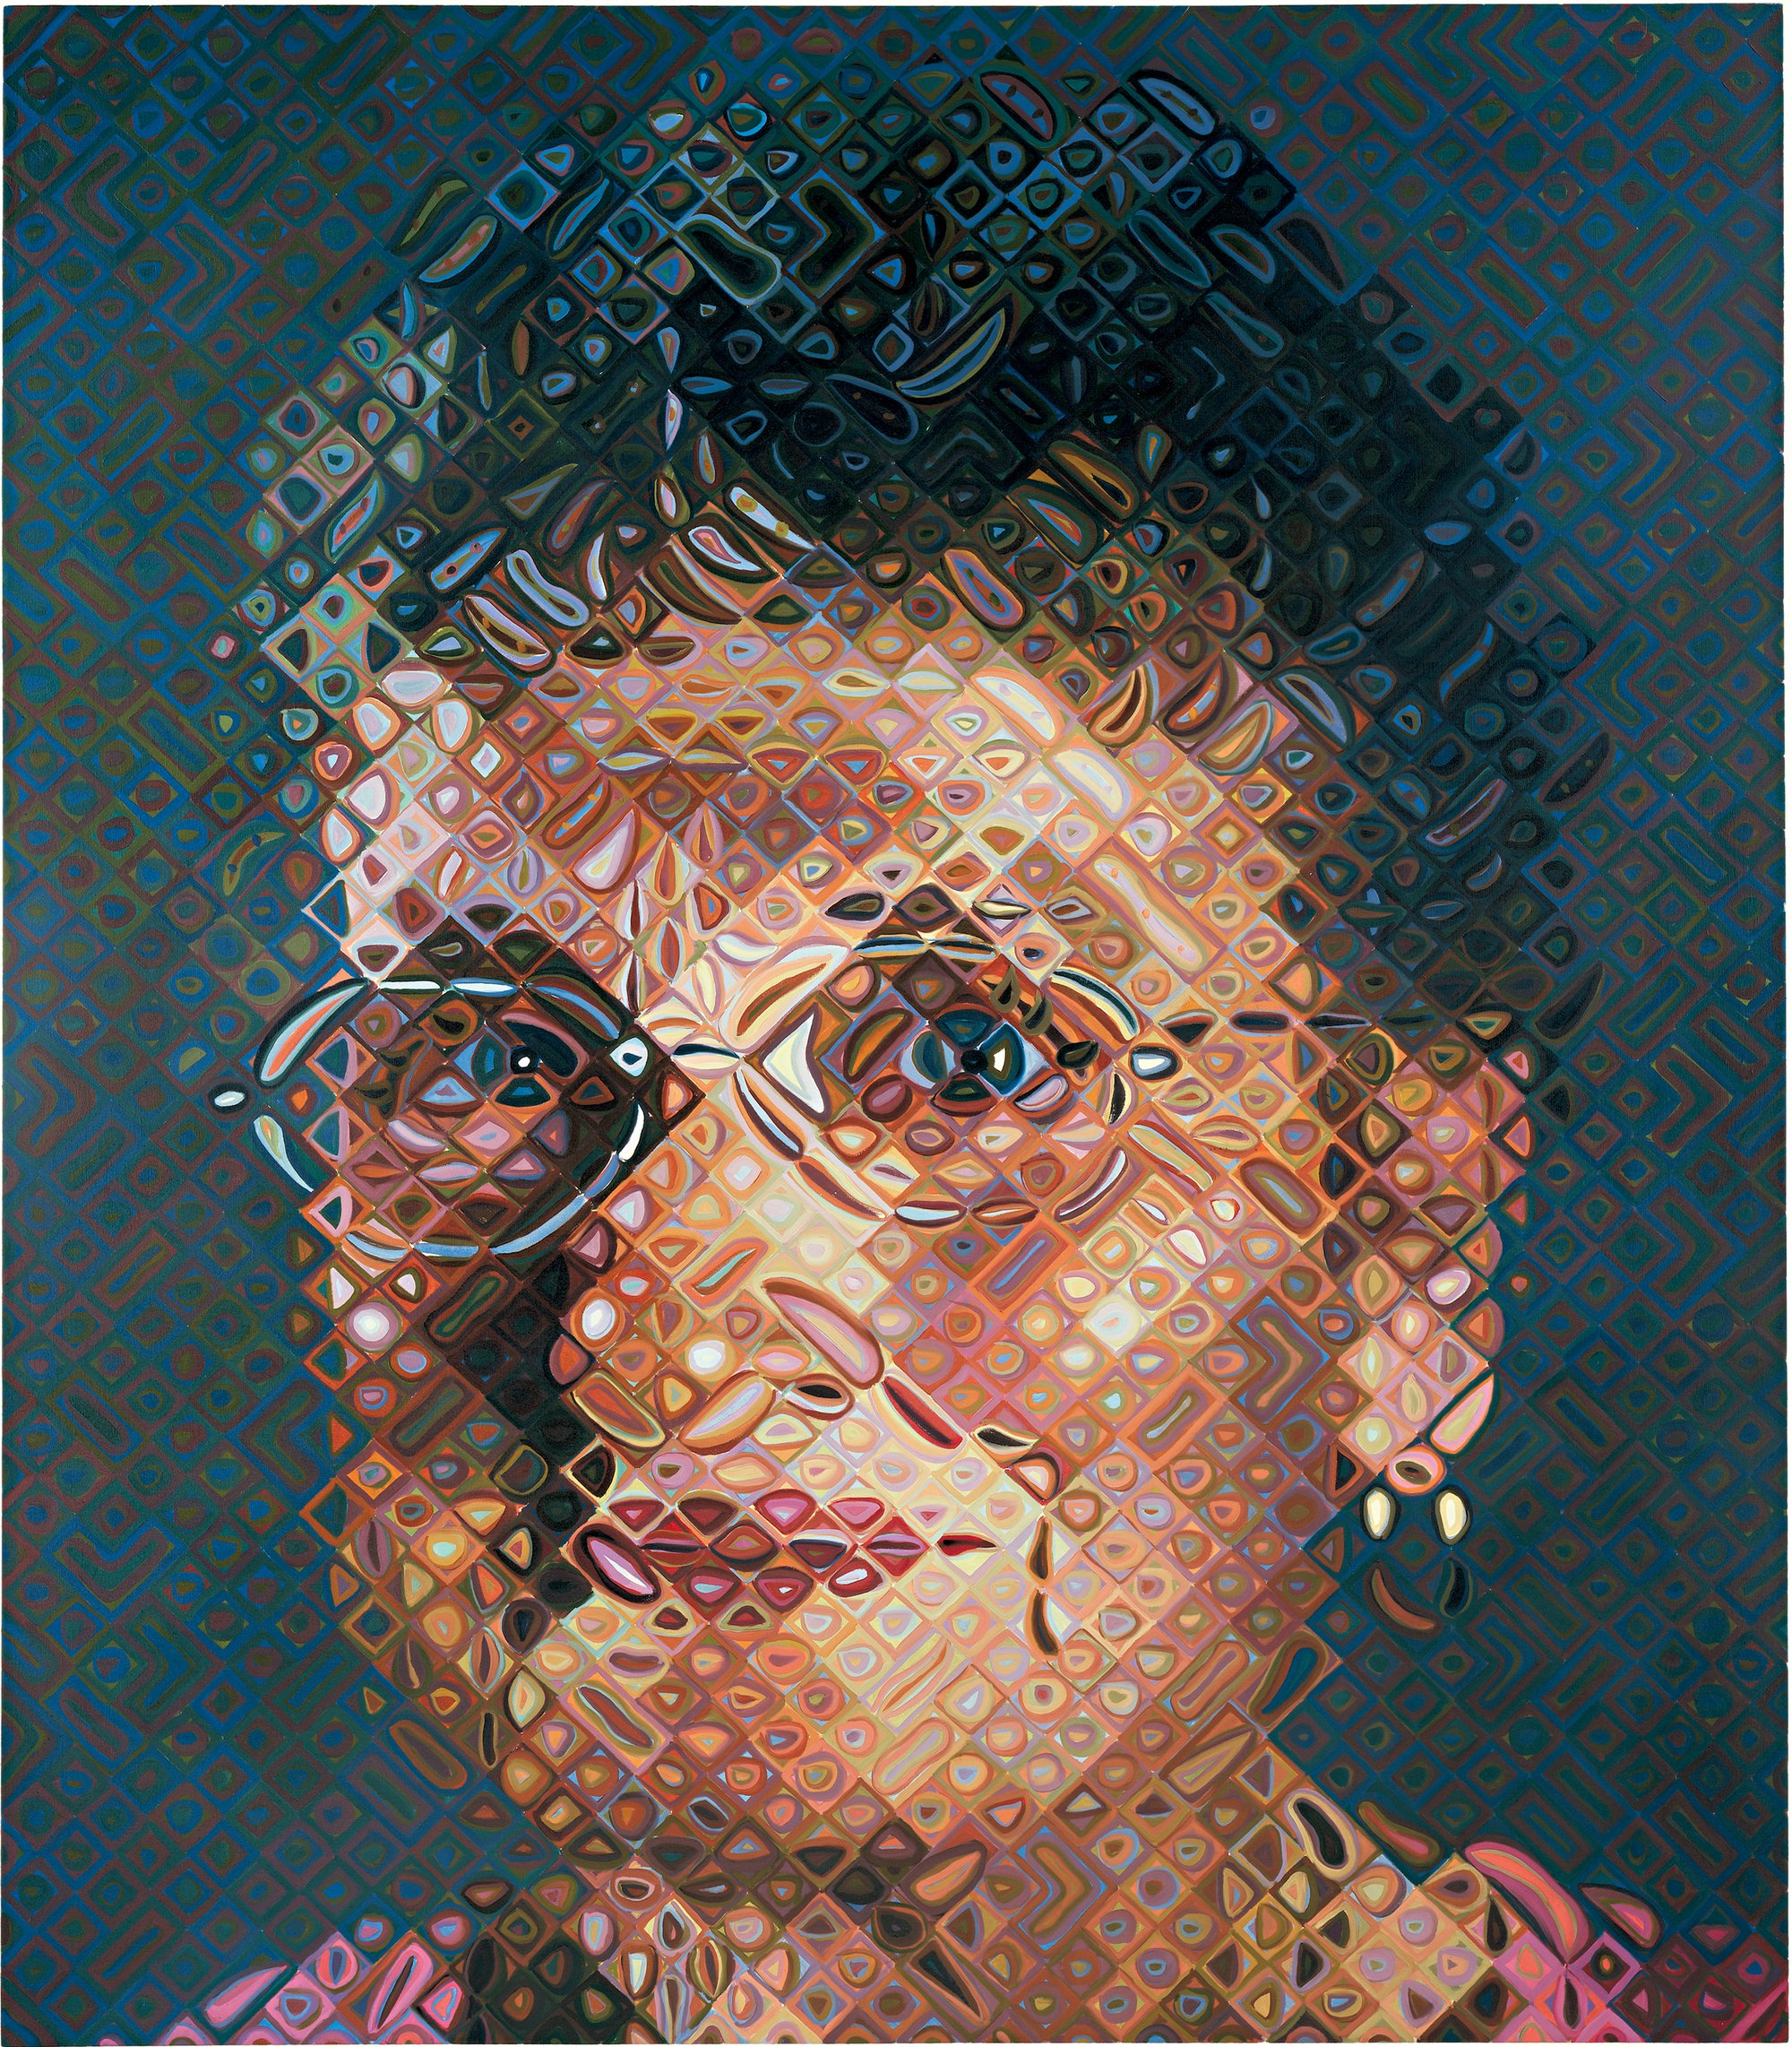 Chuck Close Pace Gallery